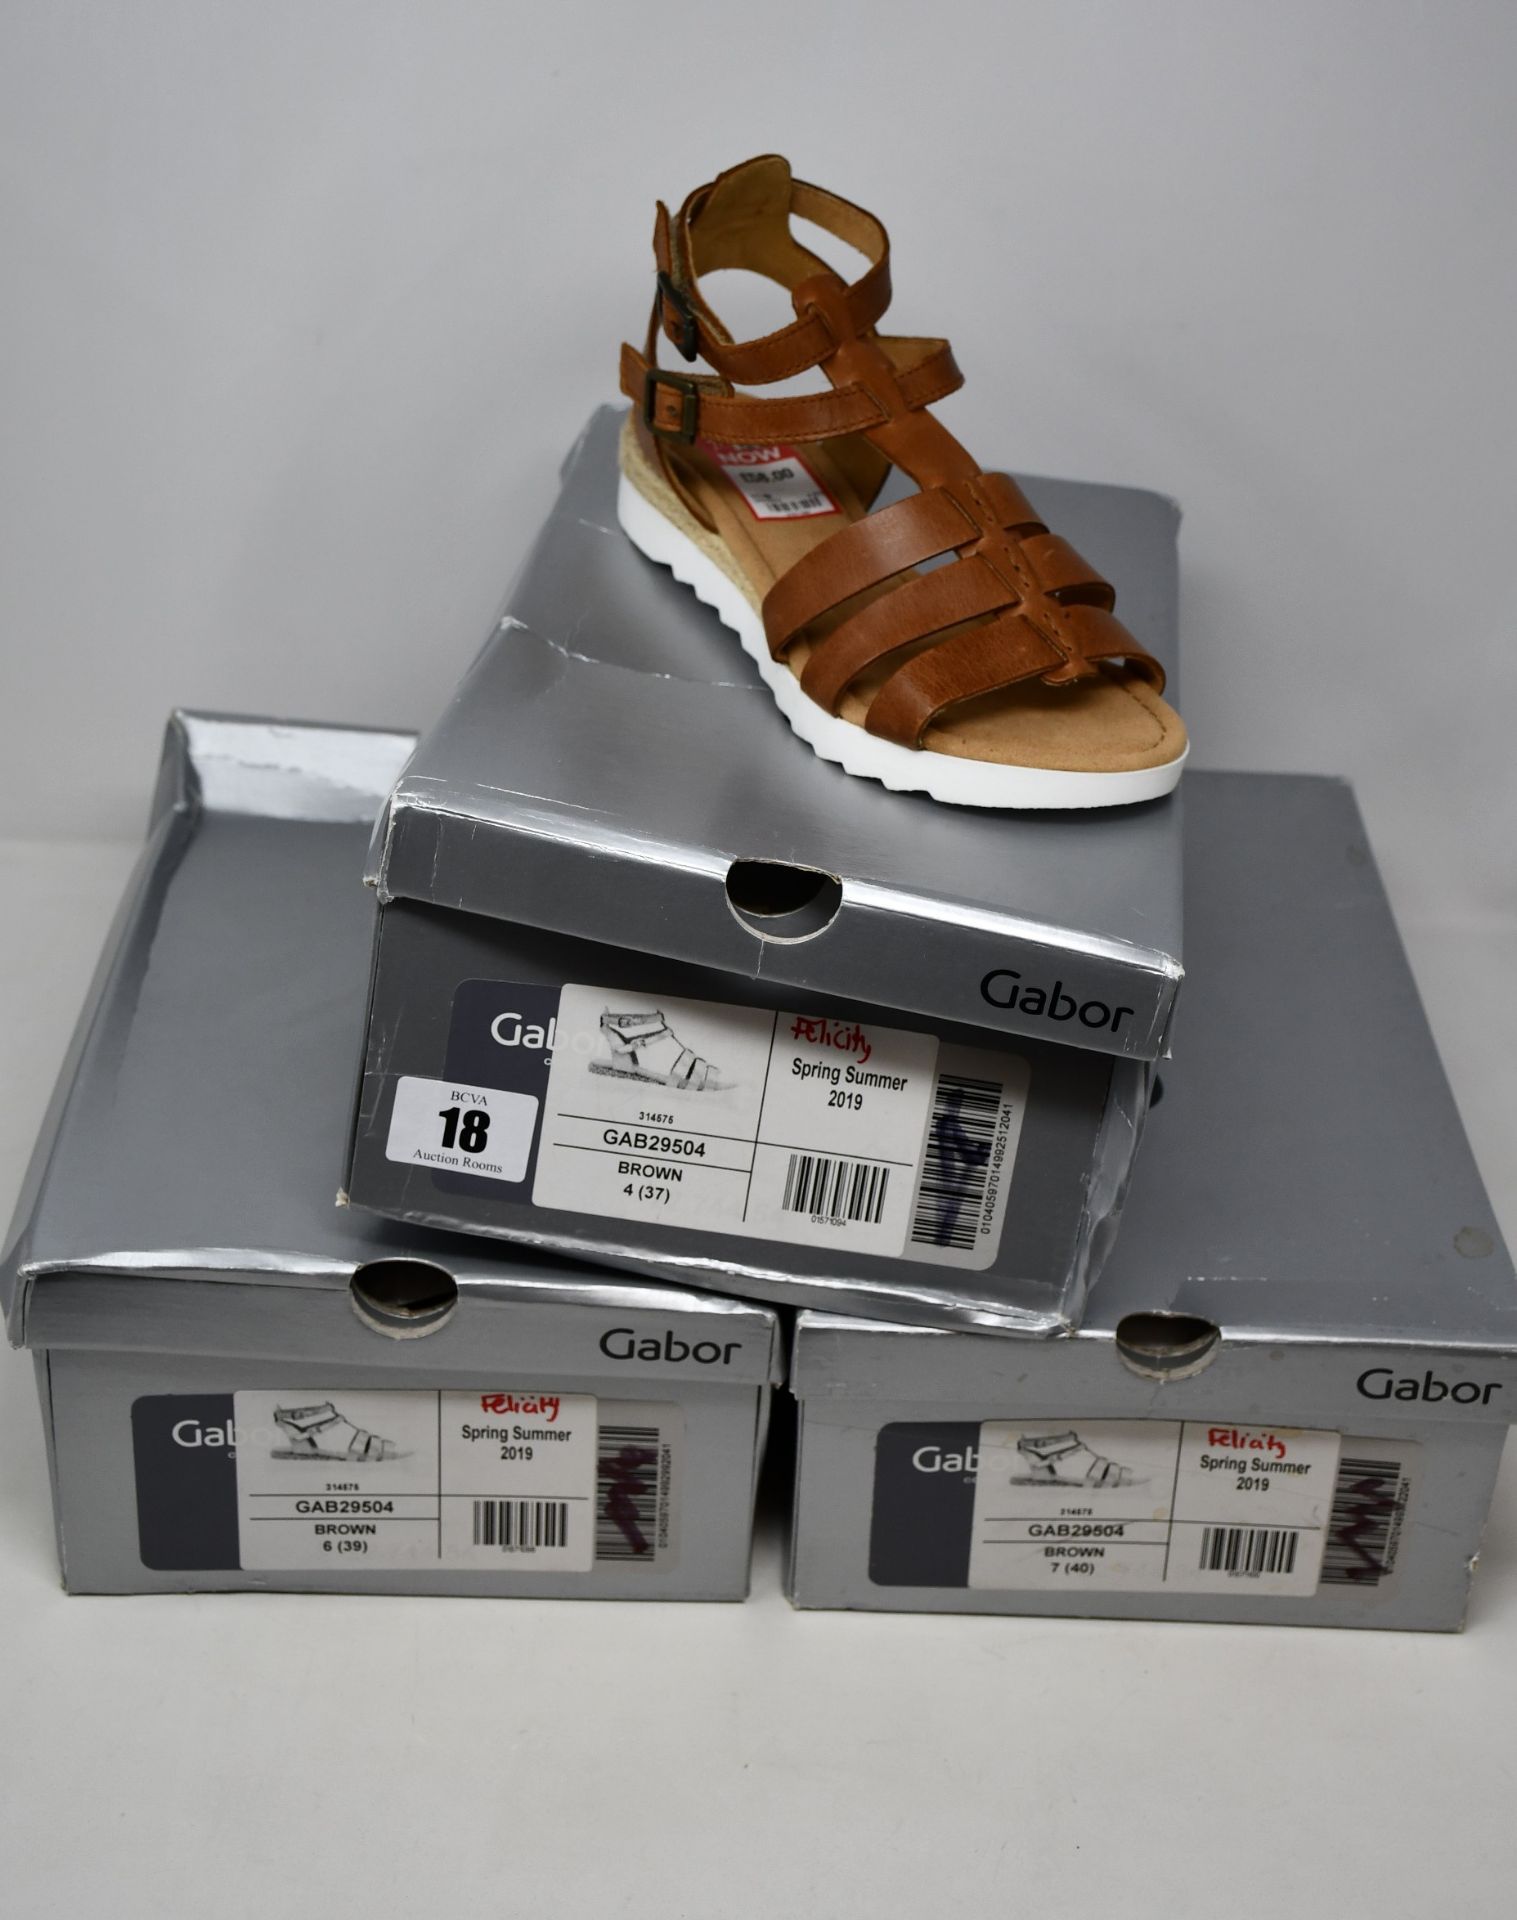 Three pairs of as new Gabor Felicity sandals (UK 4, 6, 7 - RRP £58 each).